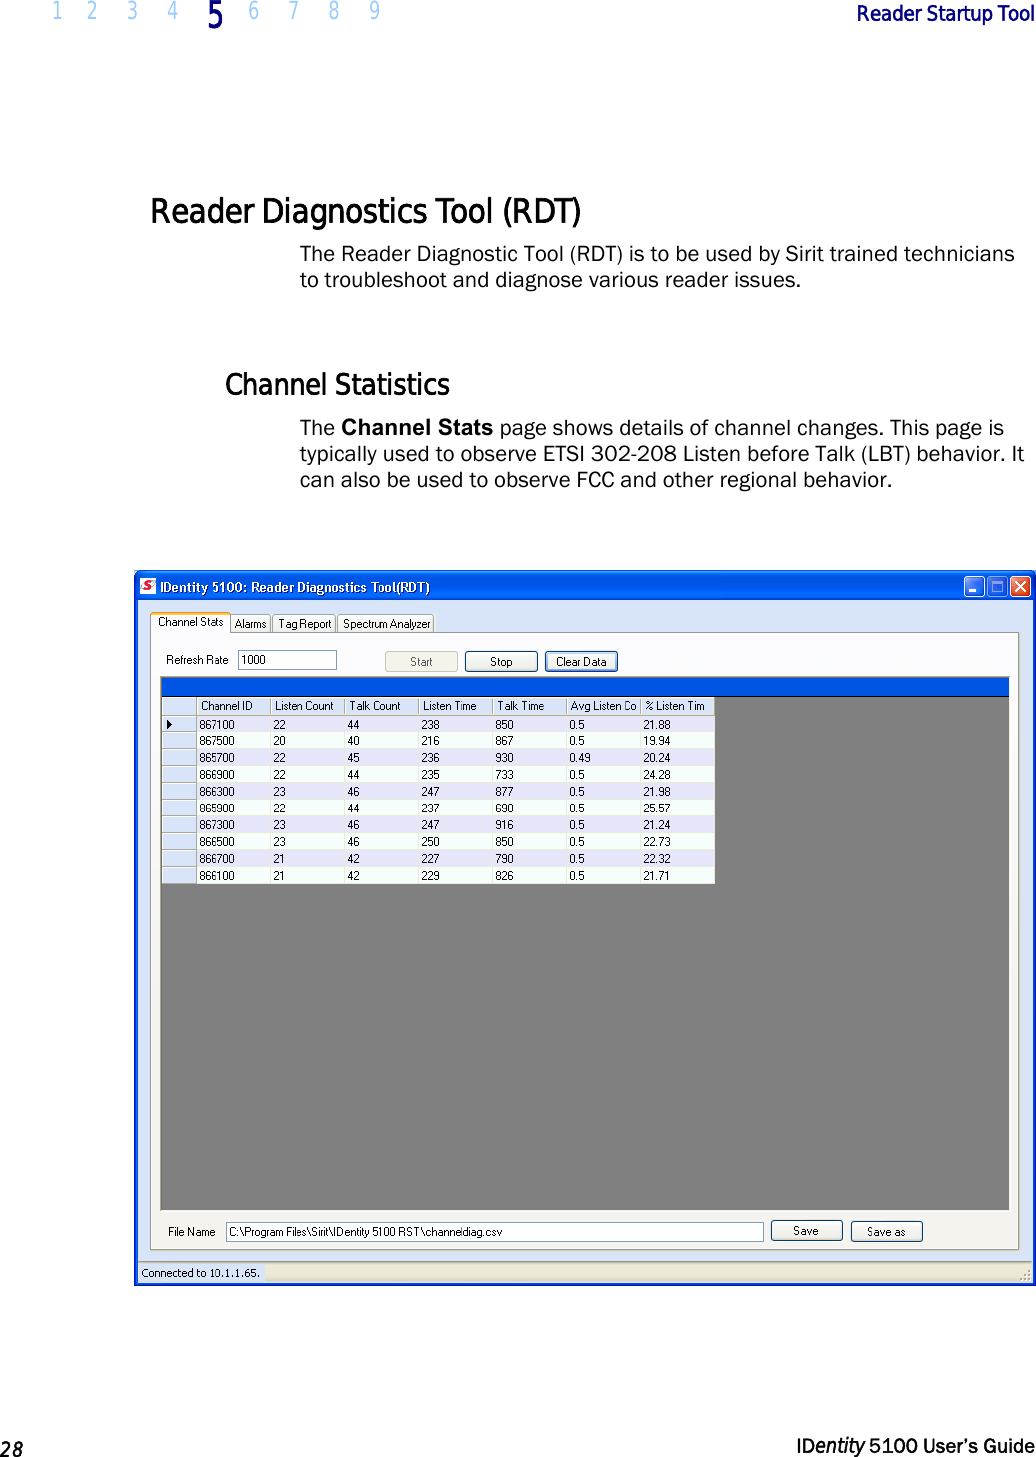  1 2  3  4 5 6 7 8 9       Reader Startup Tool   28  IDentity 5100 User’s Guide   Reader Diagnostics Tool (RDT) The Reader Diagnostic Tool (RDT) is to be used by Sirit trained technicians to troubleshoot and diagnose various reader issues.   Channel Statistics The Channel Stats page shows details of channel changes. This page is typically used to observe ETSI 302-208 Listen before Talk (LBT) behavior. It can also be used to observe FCC and other regional behavior.    